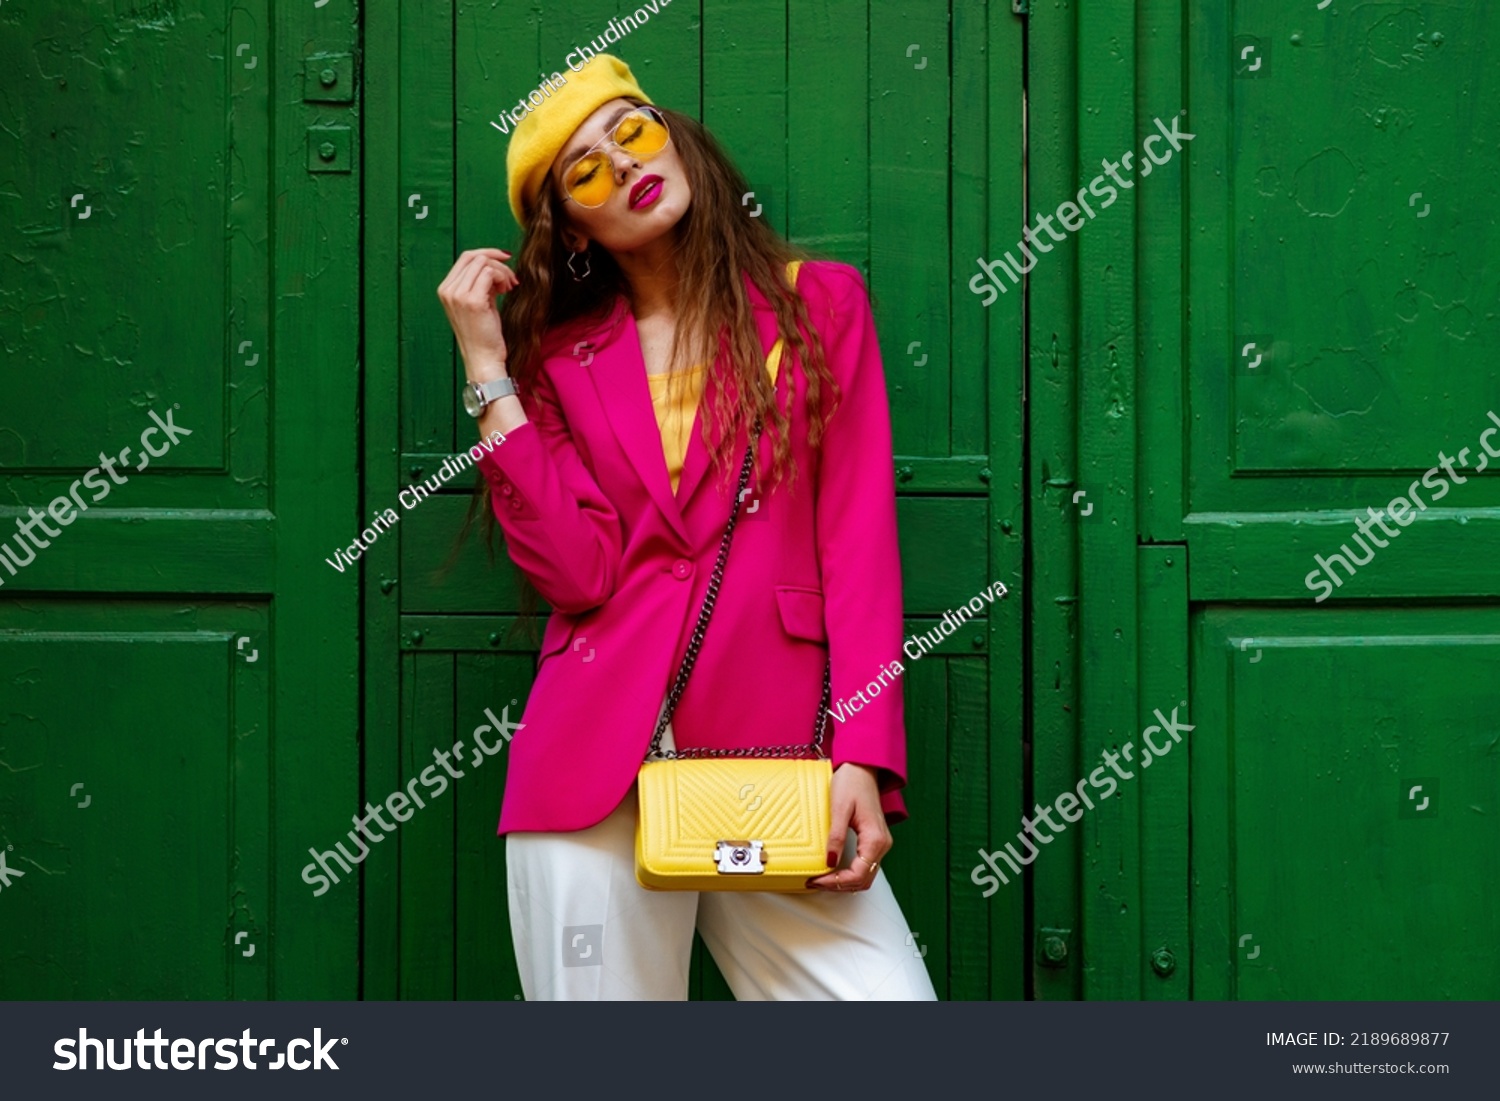 Fashionable confident woman wearing trendy outfit with yellow sunglasses, beret, wrist watch, shoulder bag, pink fuchsia color blazer, posing near green door. Copy, empty space for text #2189689877